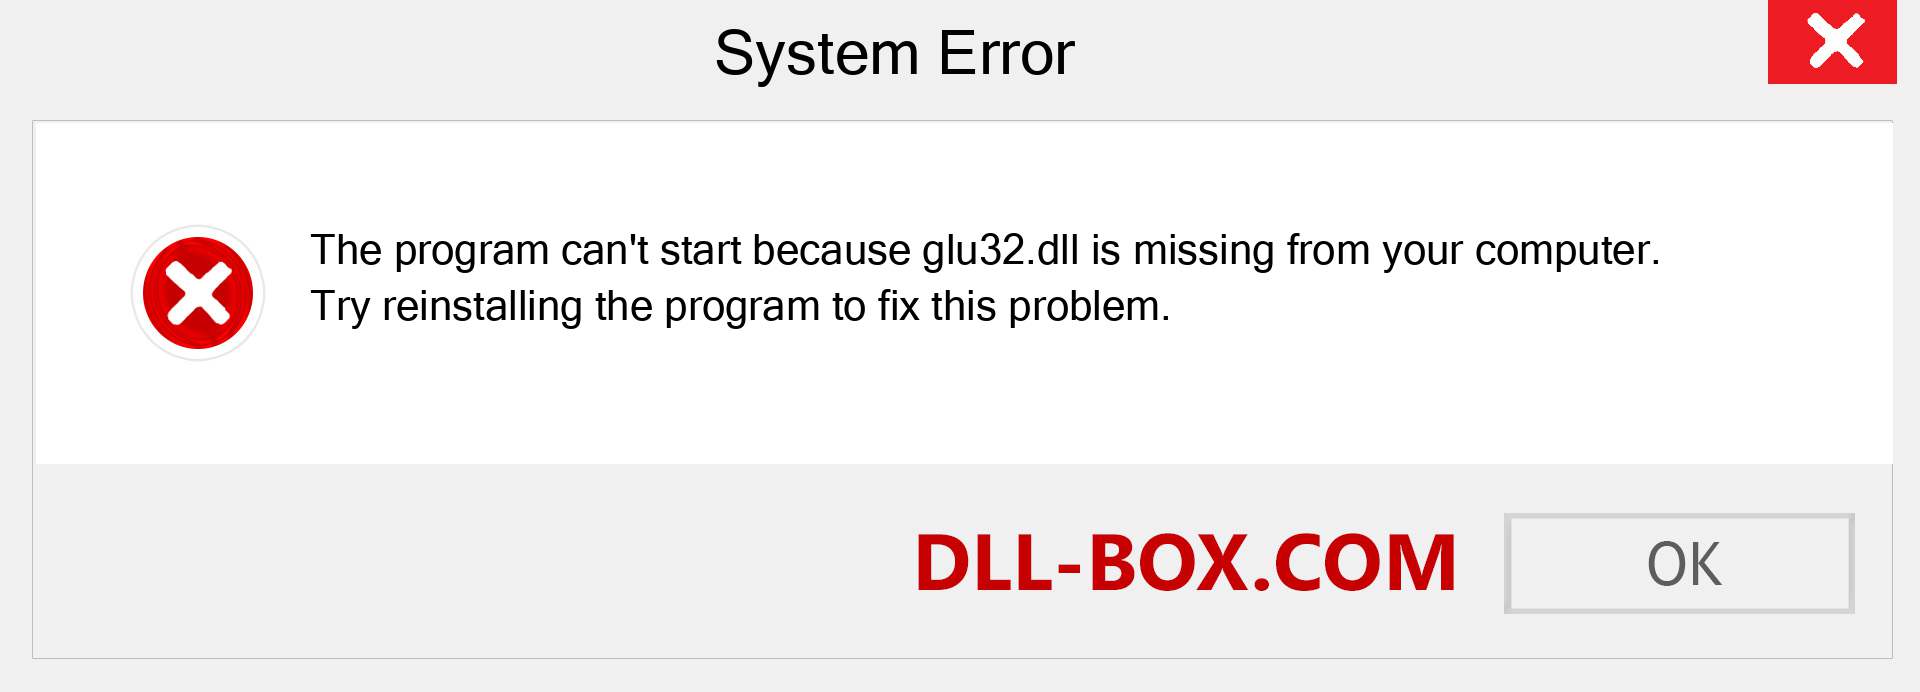  glu32.dll file is missing?. Download for Windows 7, 8, 10 - Fix  glu32 dll Missing Error on Windows, photos, images